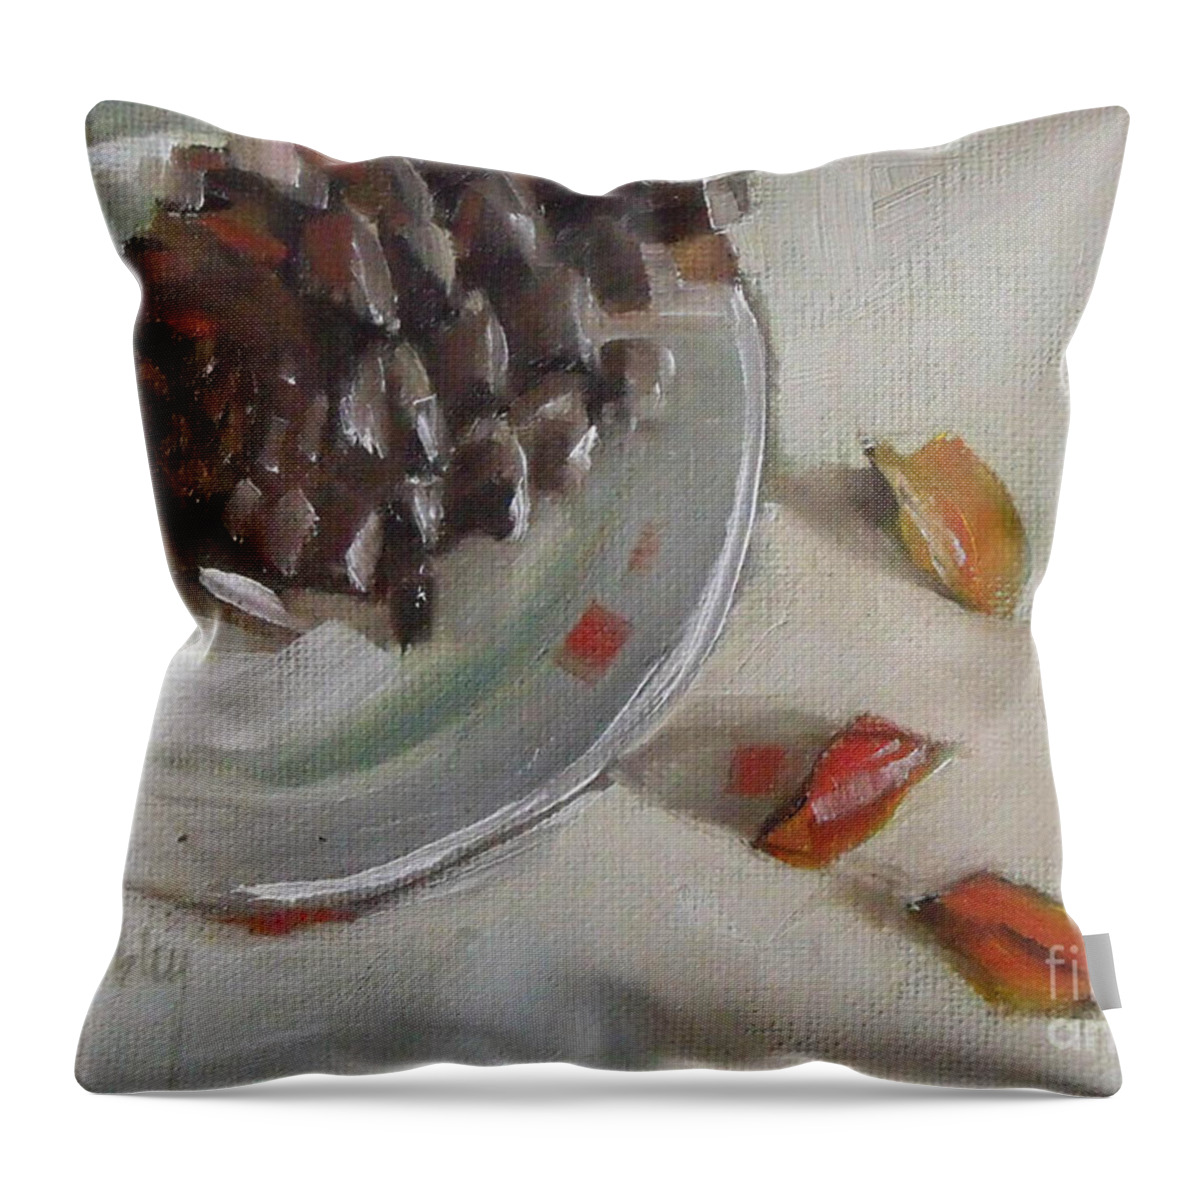 Still Life Throw Pillow featuring the painting Pine cone still life on a plate by Mary Hubley